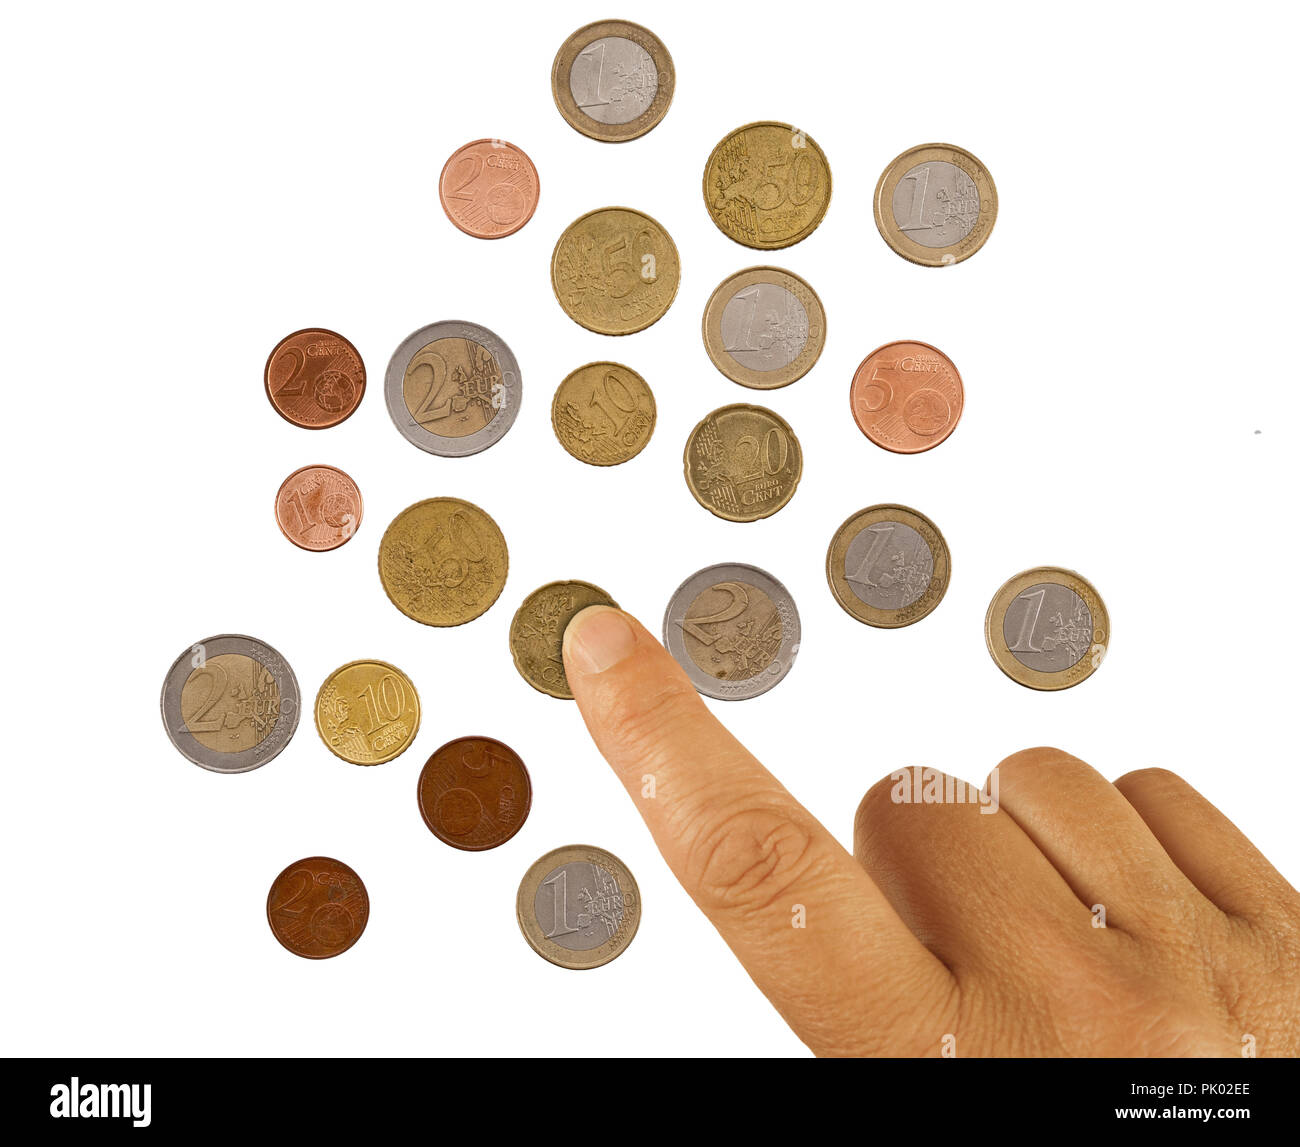 Mature, woman hand counting pennies, small change. Poverty concept. European euro coins, isolated on white. Stock Photo